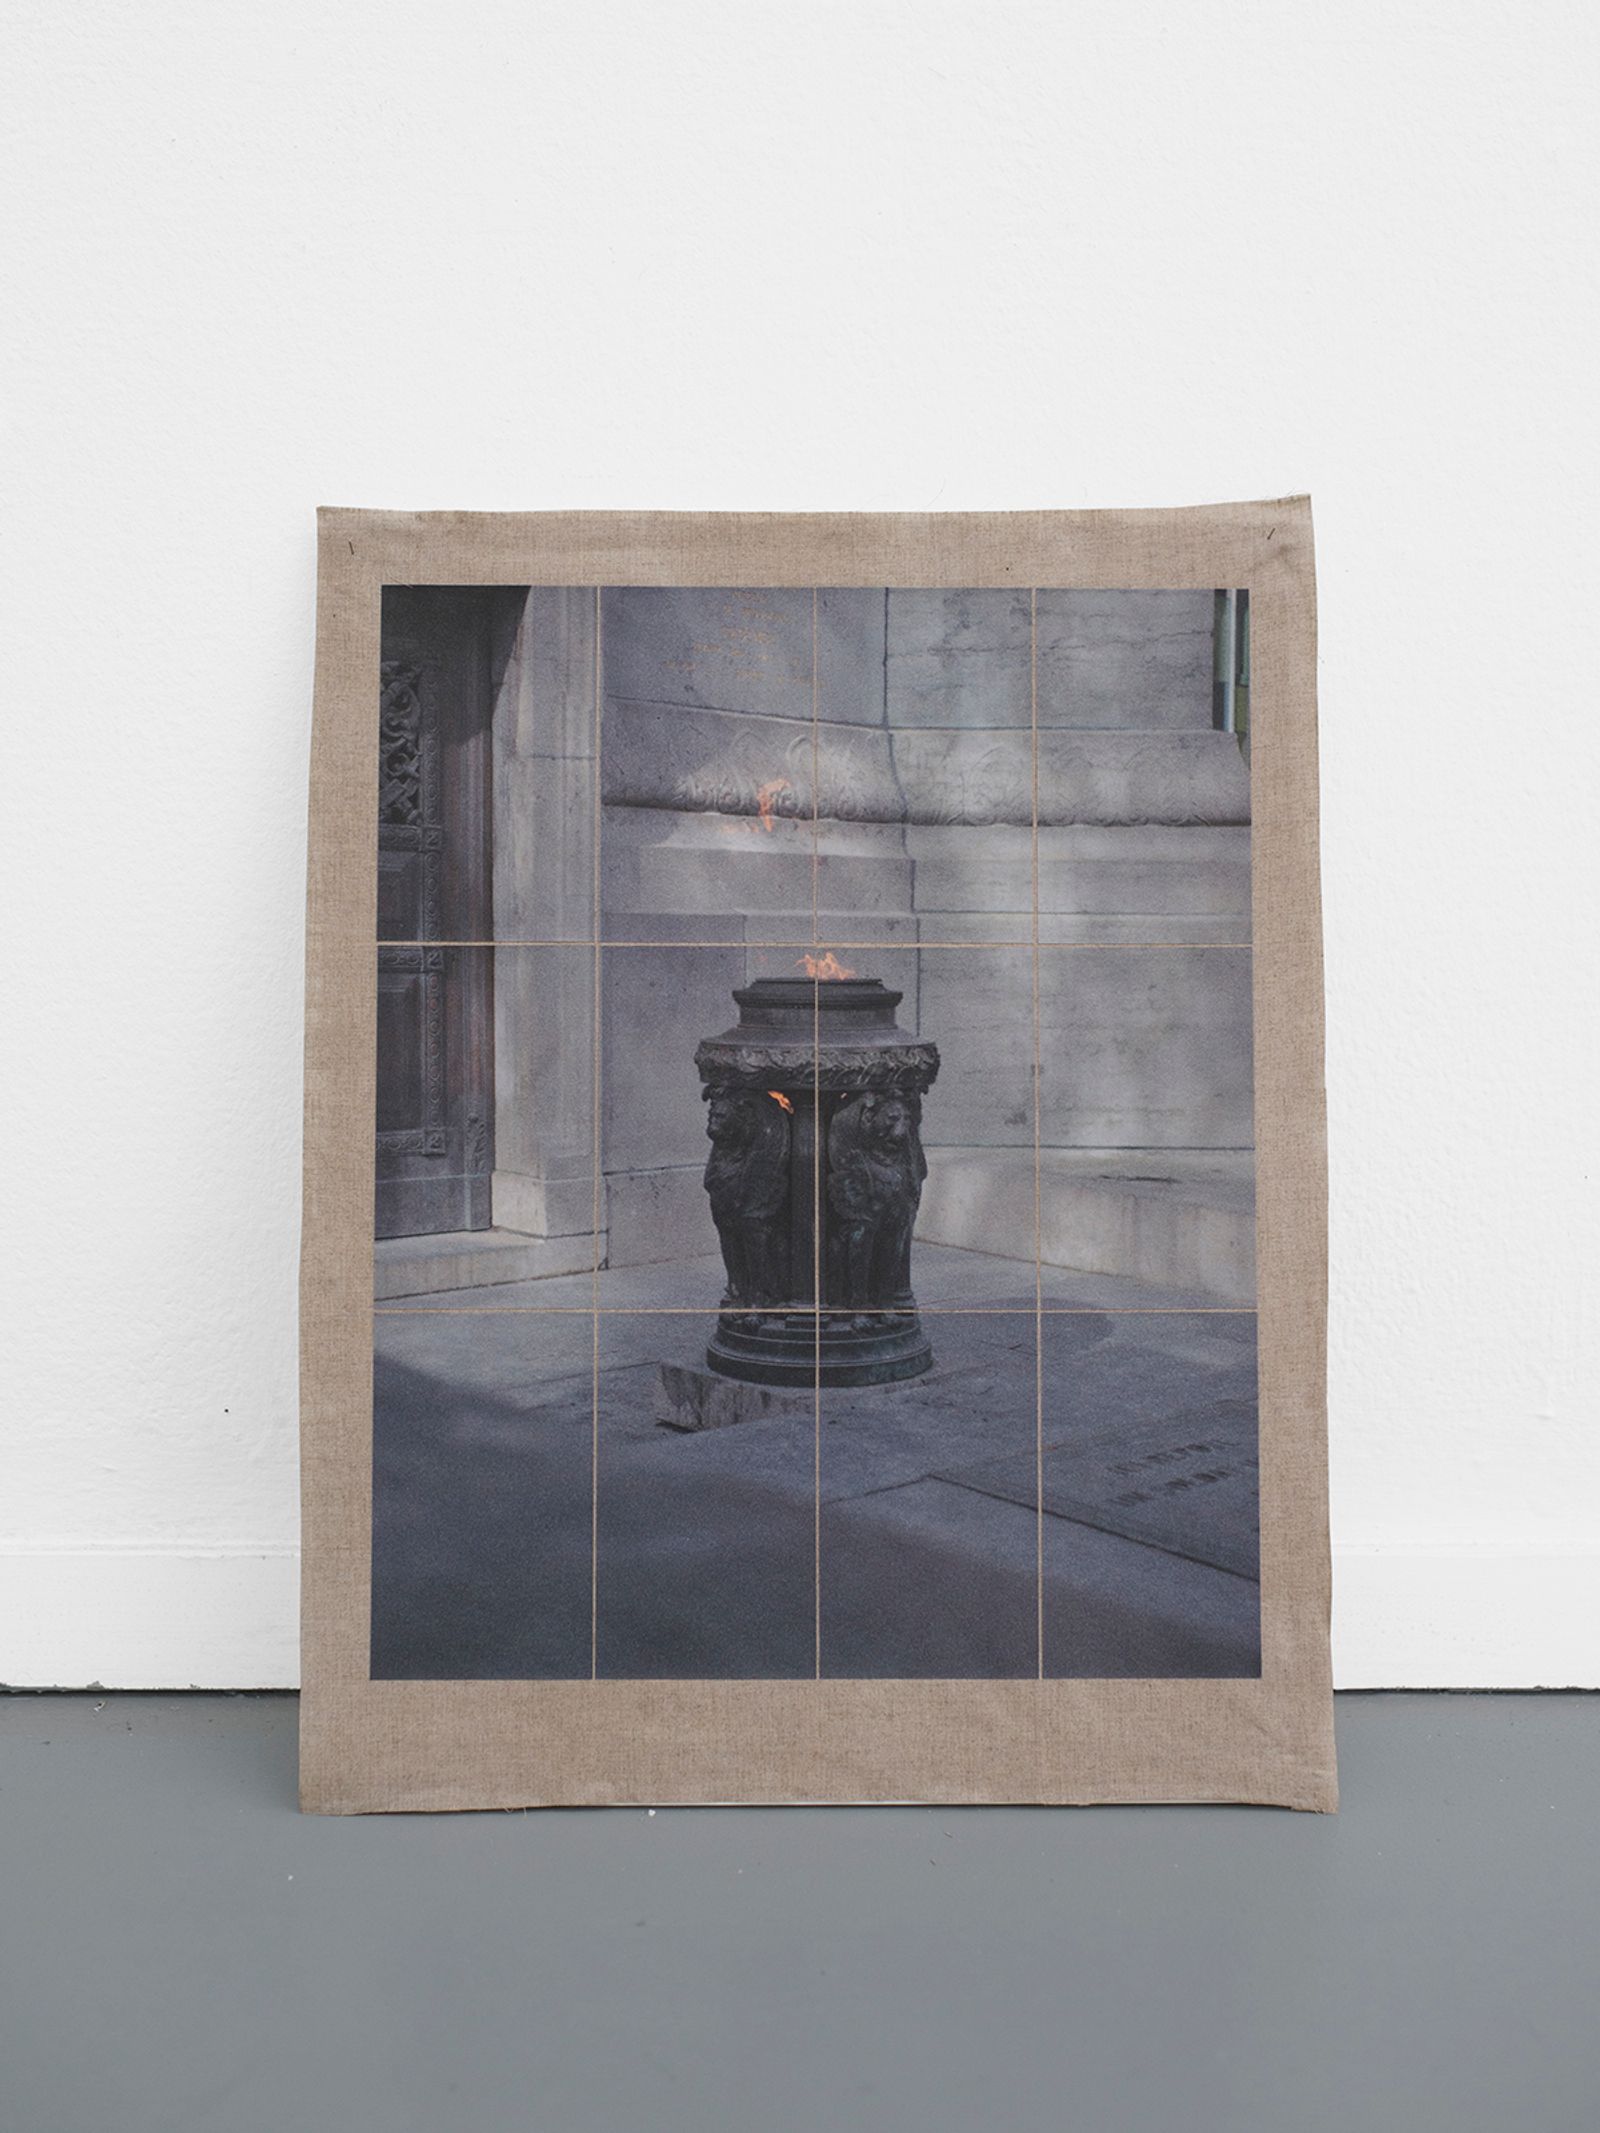 © Esther Hovers - Structures, Unknown Soldier, 2019 58 x 46 cm / 22.8 x 18.1 in. Inkjet prints on Tosa Shi – 54 gsm, fixed on linen.